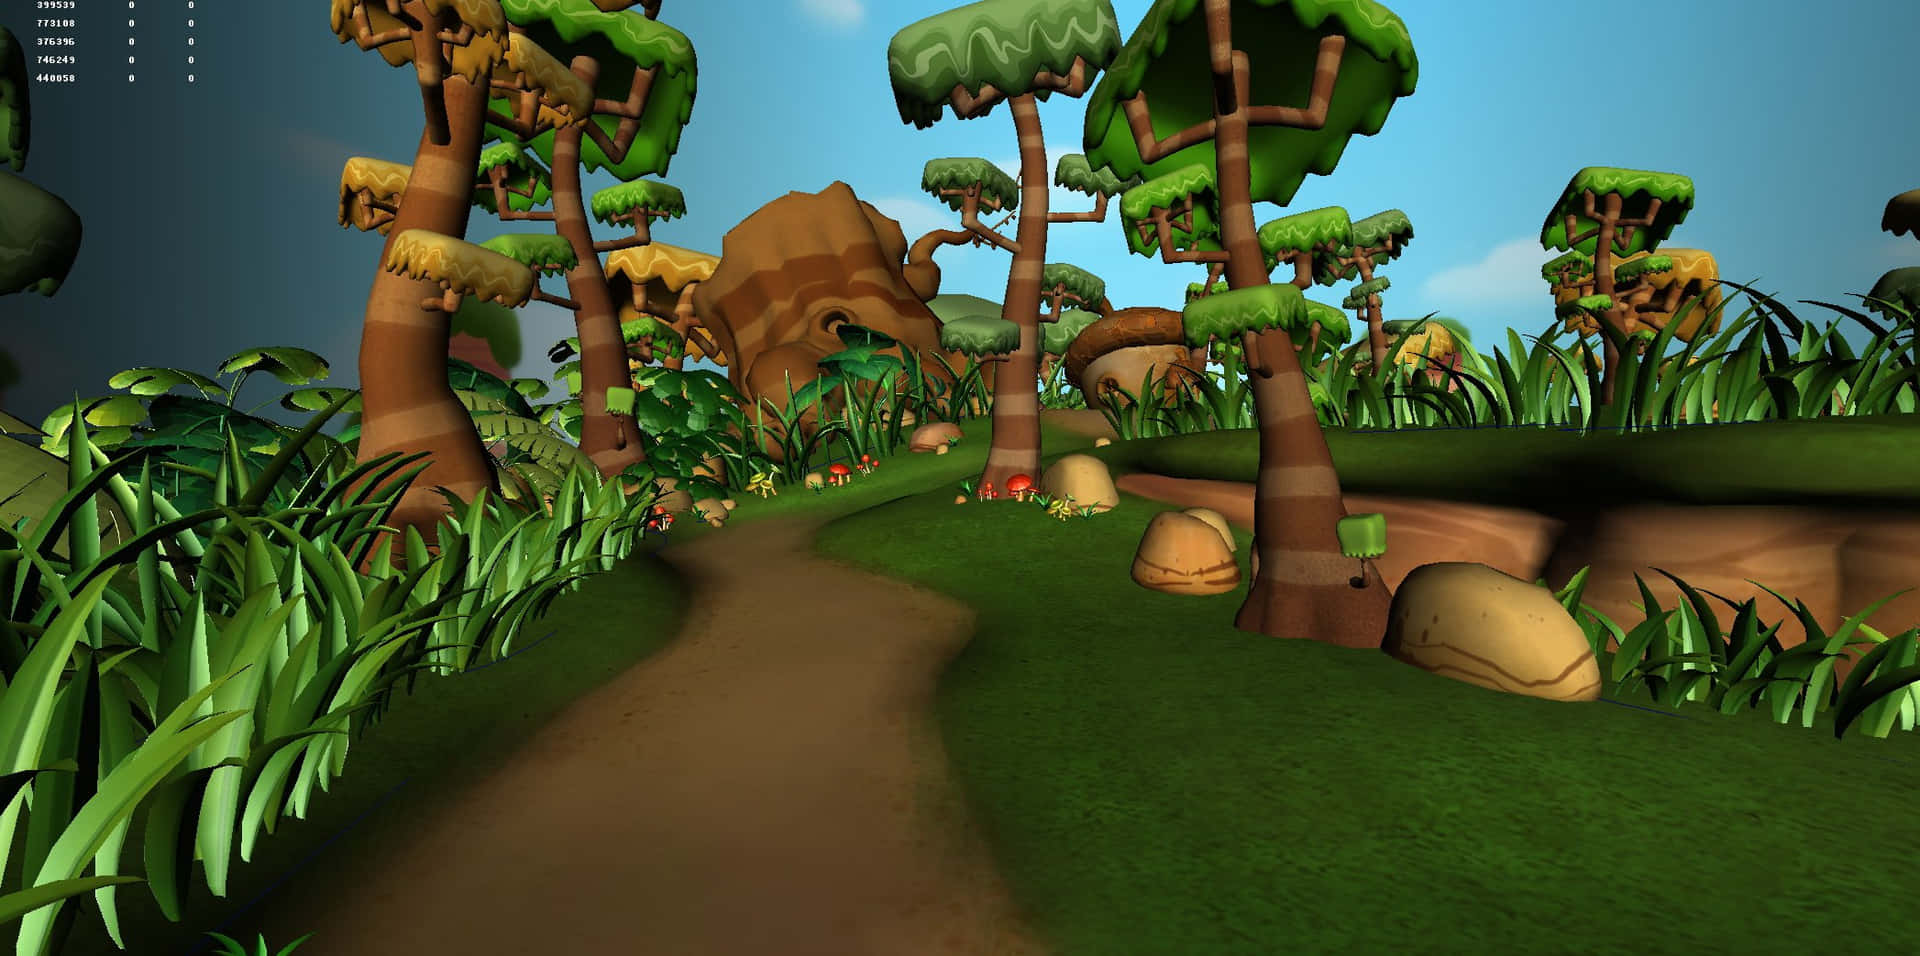 Welcome to the Enchanting Cartoon Forest!